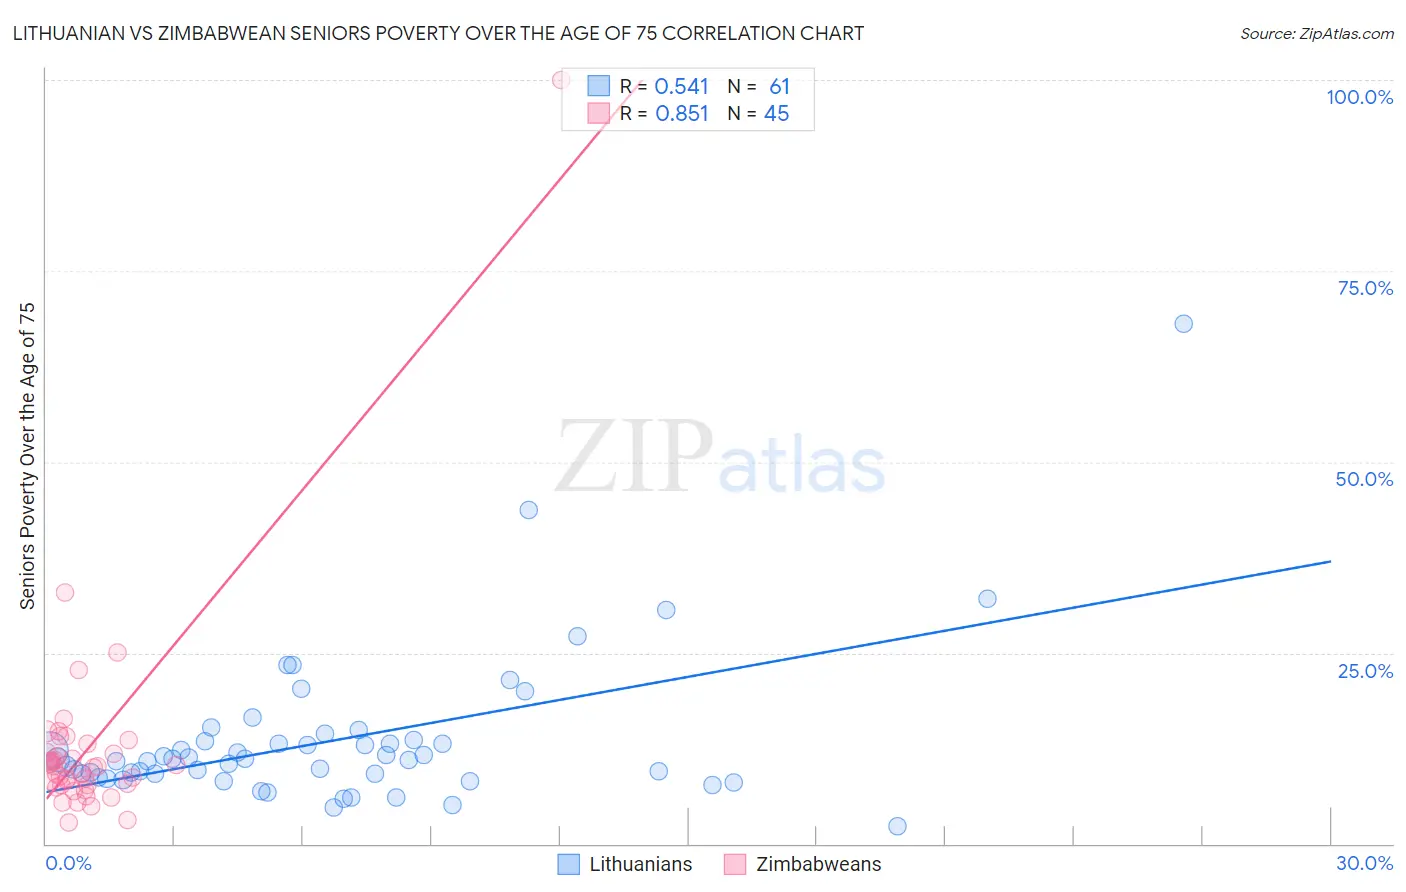 Lithuanian vs Zimbabwean Seniors Poverty Over the Age of 75